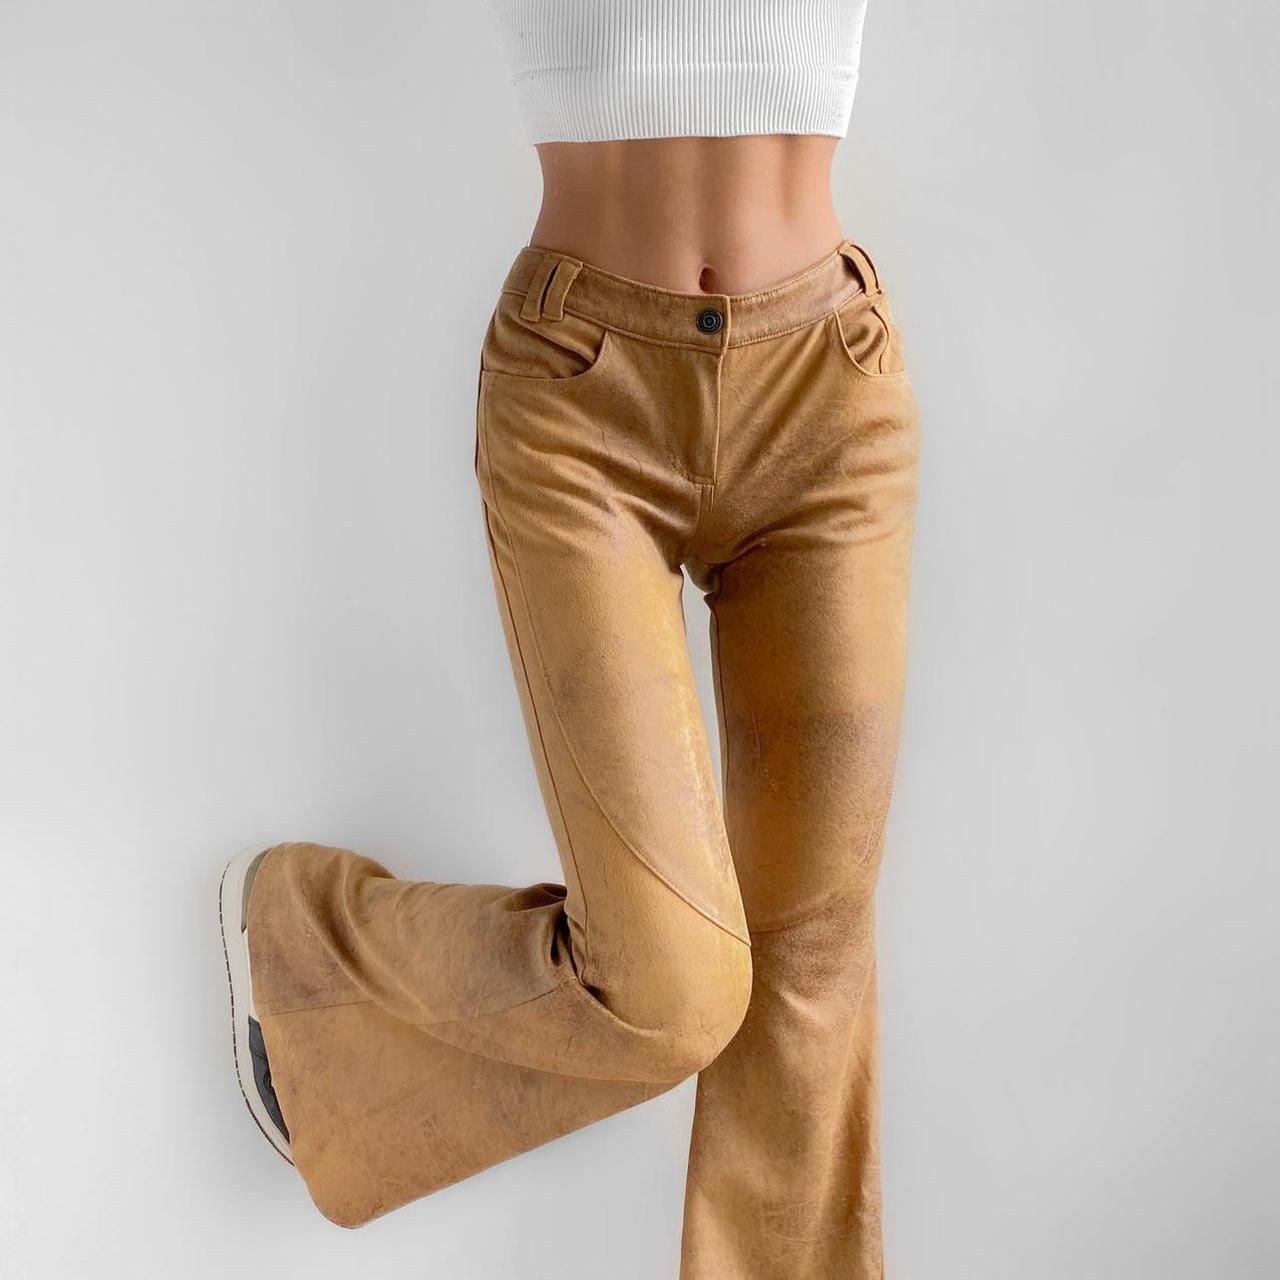 Free People Beige Leather Pants for Women